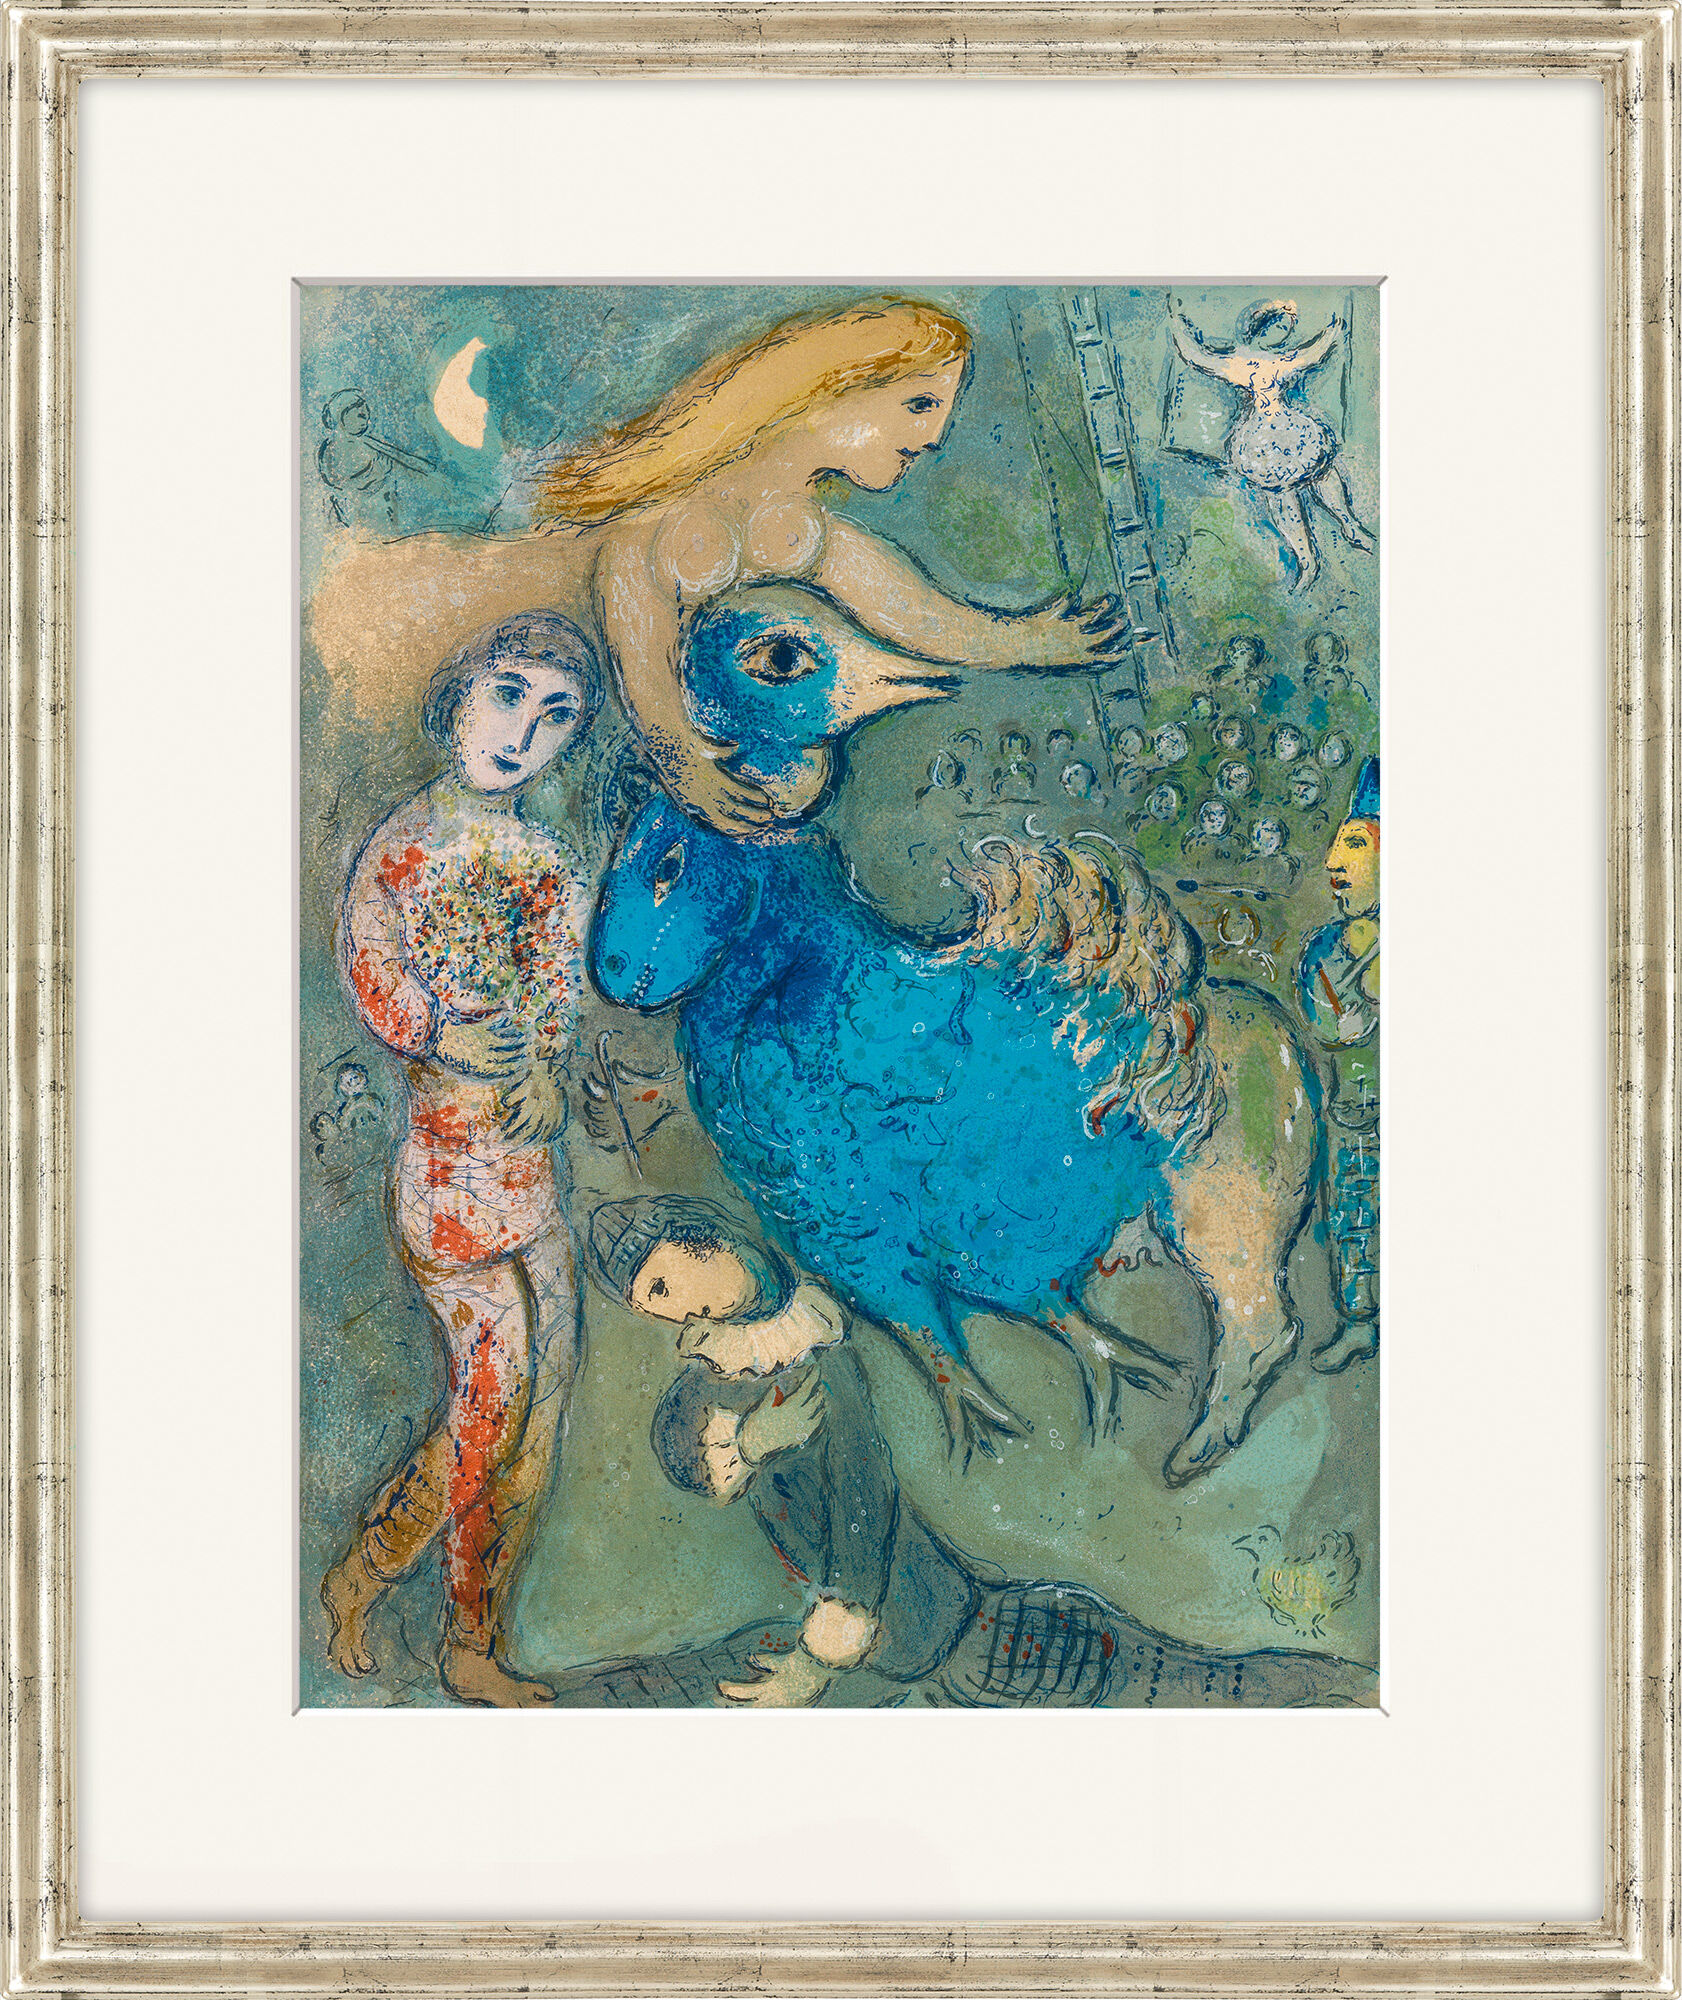 Picture "Le Cirque - Frontispice" (1965) by Marc Chagall